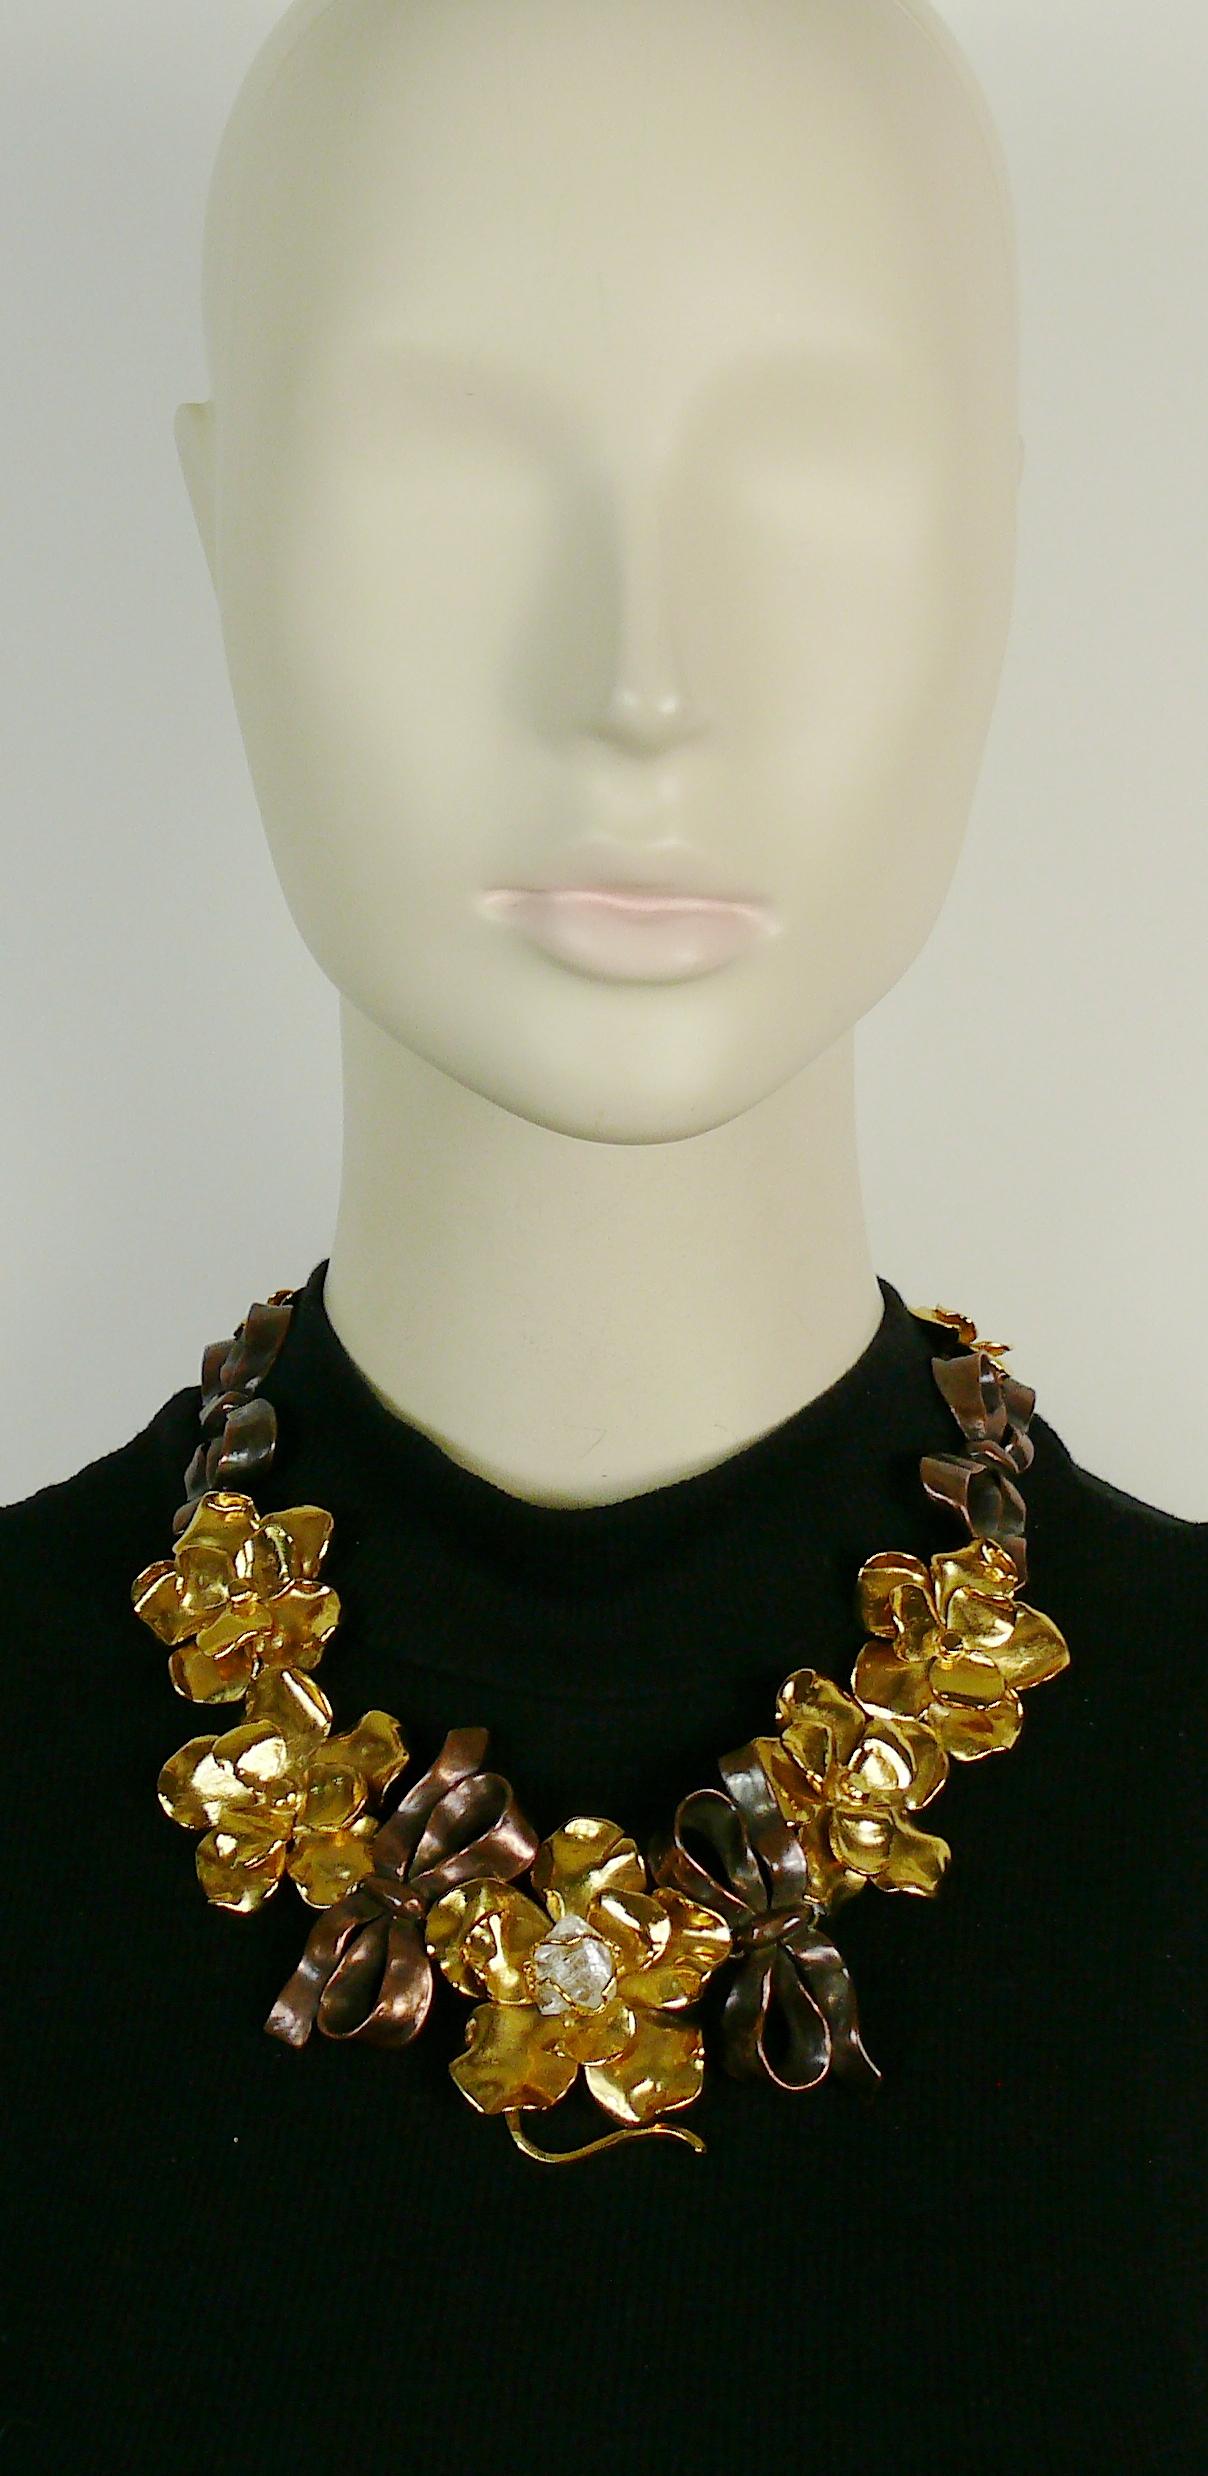 YVES SAINT LAURENT vintage rare two toned necklace featuring three-dimensional gold toned flowers and antiqued copper toned bow of various sizes. The central flower is embellished with an encaged rock crystal prism center.

Adjustable hook clasp